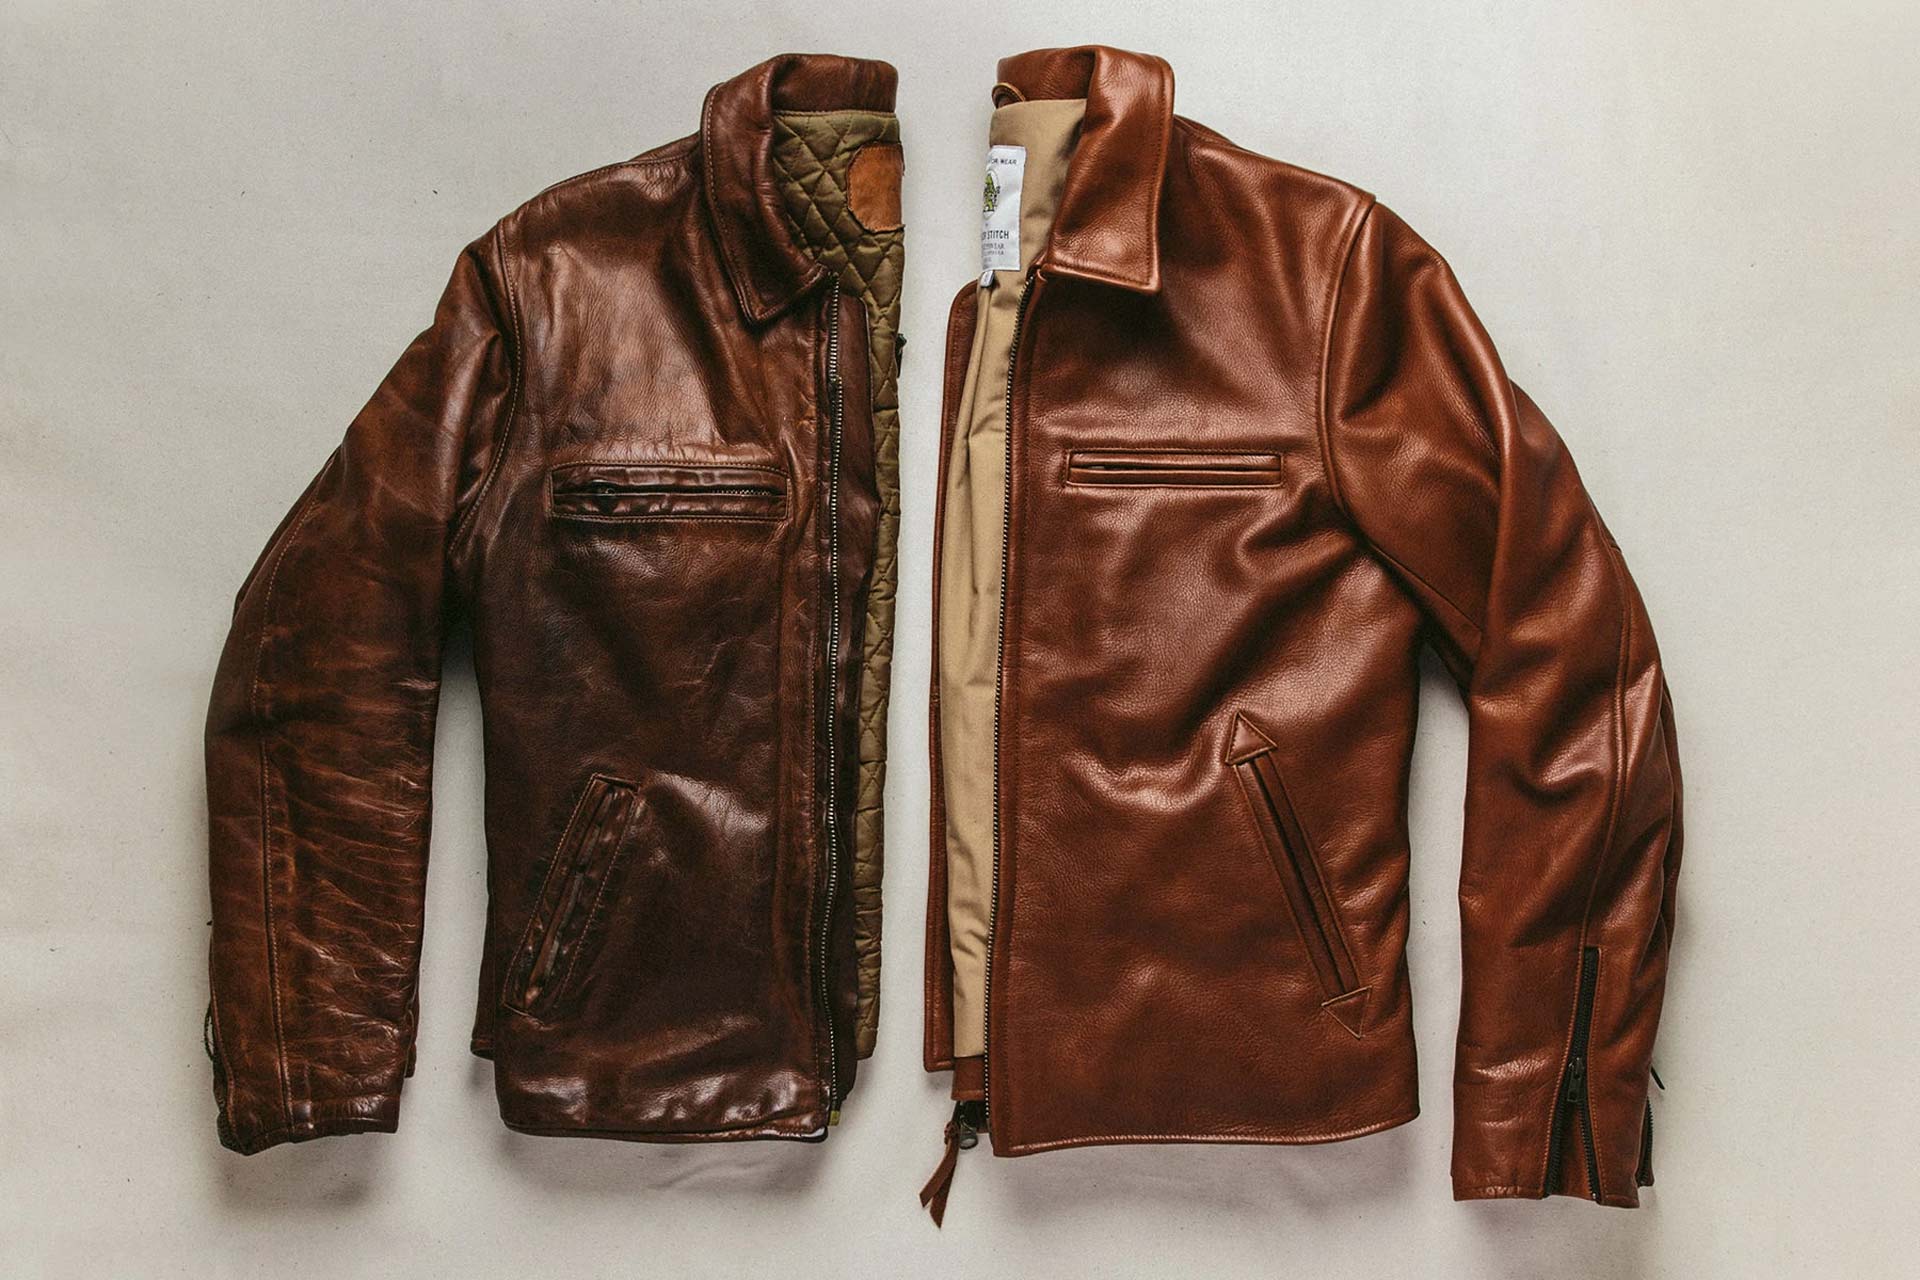 The 30 Best Men S Leather Jackets Improb, Who Makes The Best Leather Jacket